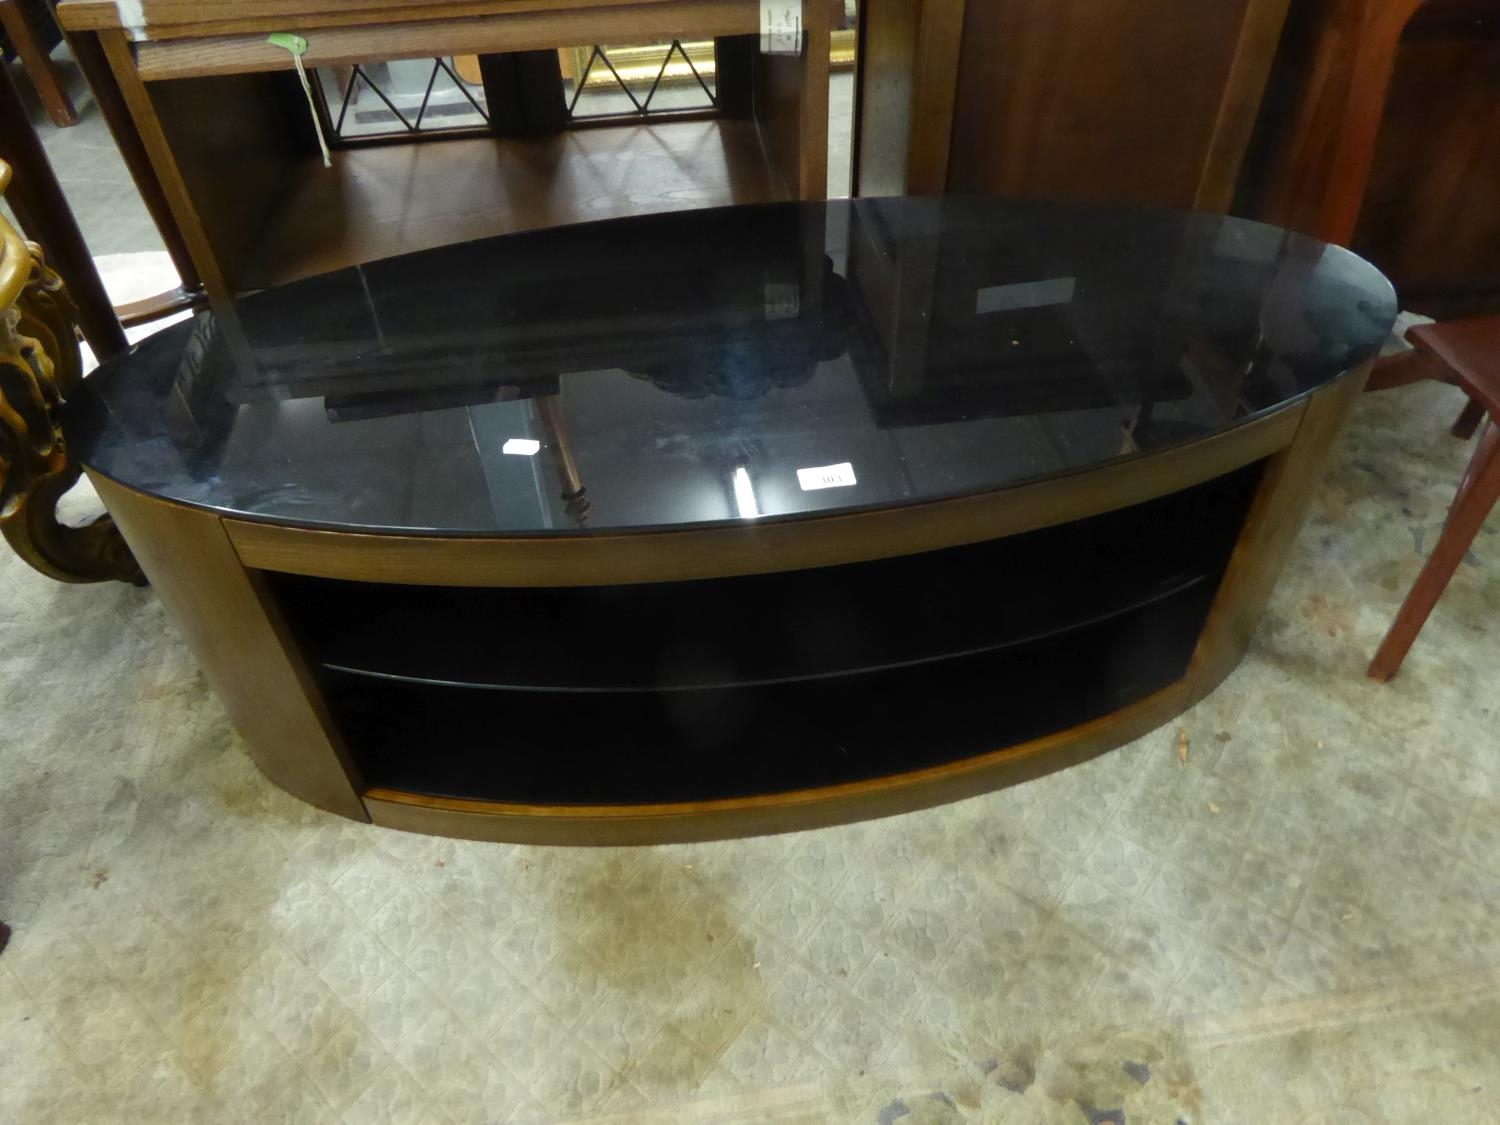 AN OVAL TV STAND WITH BLACK GLASS TOP AND SHELVES